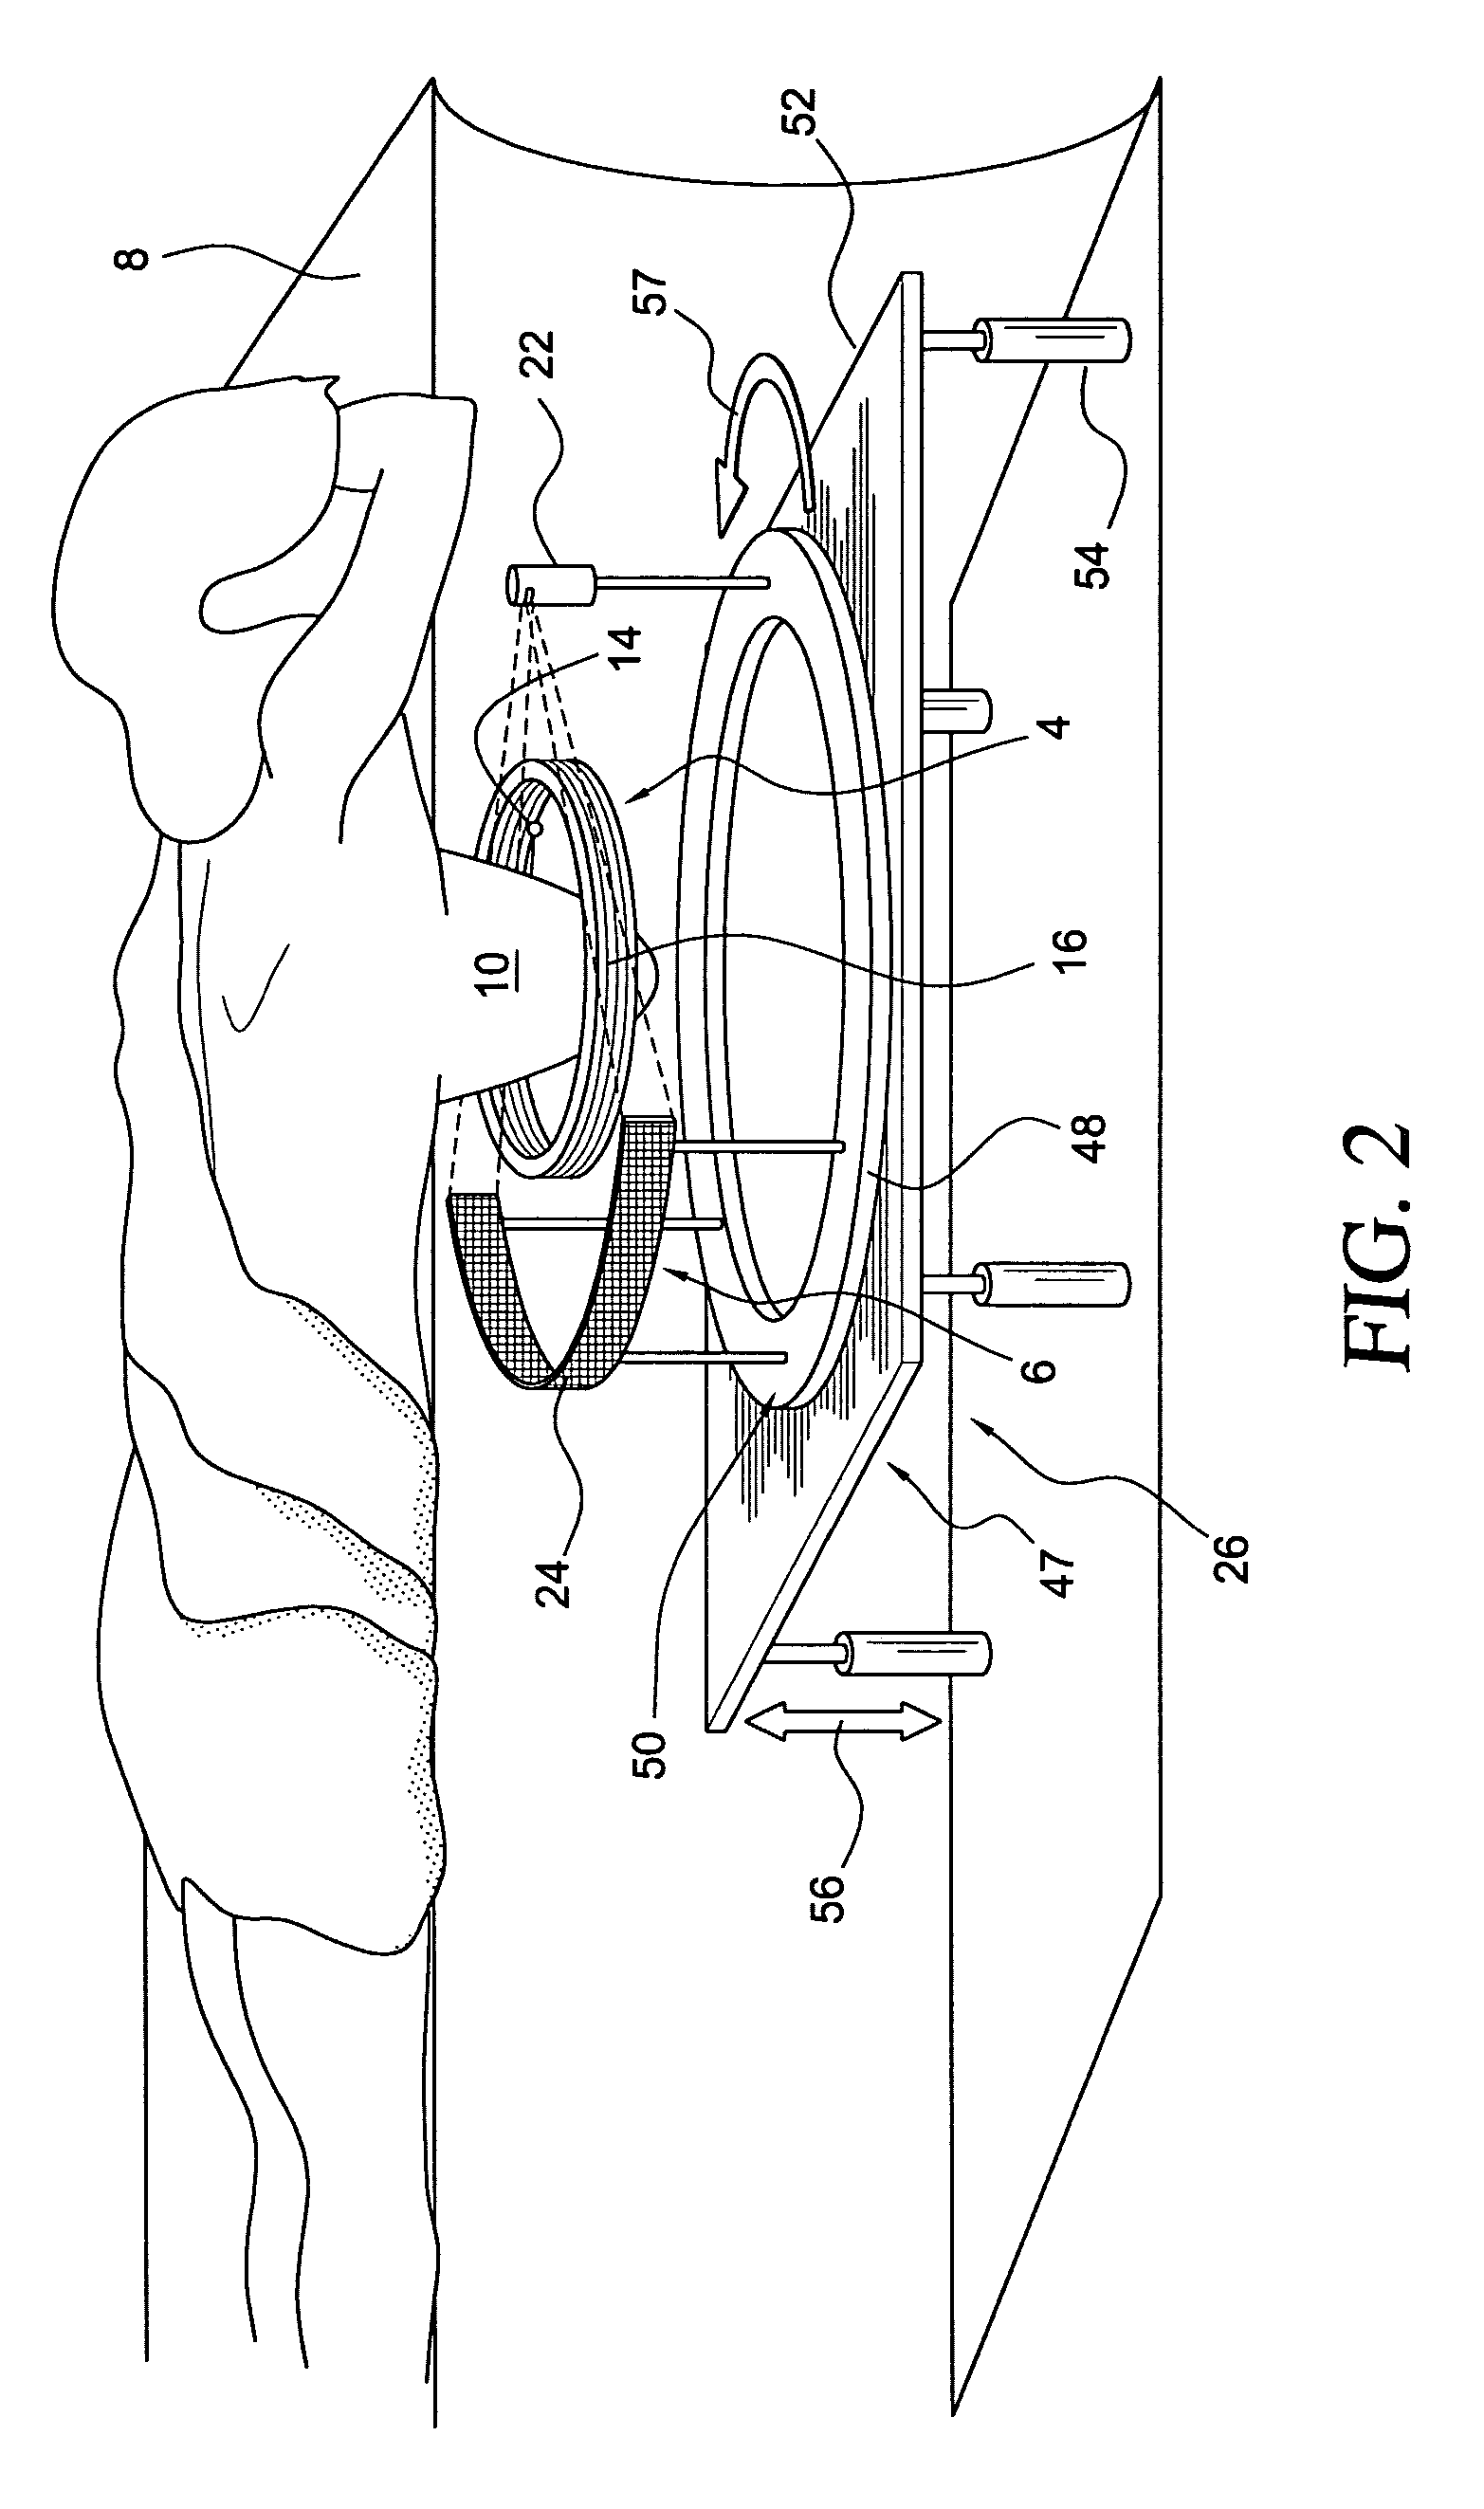 Apparatus and method to acquire data for reconstruction of images pertaining to functional and anatomical structure of the breast